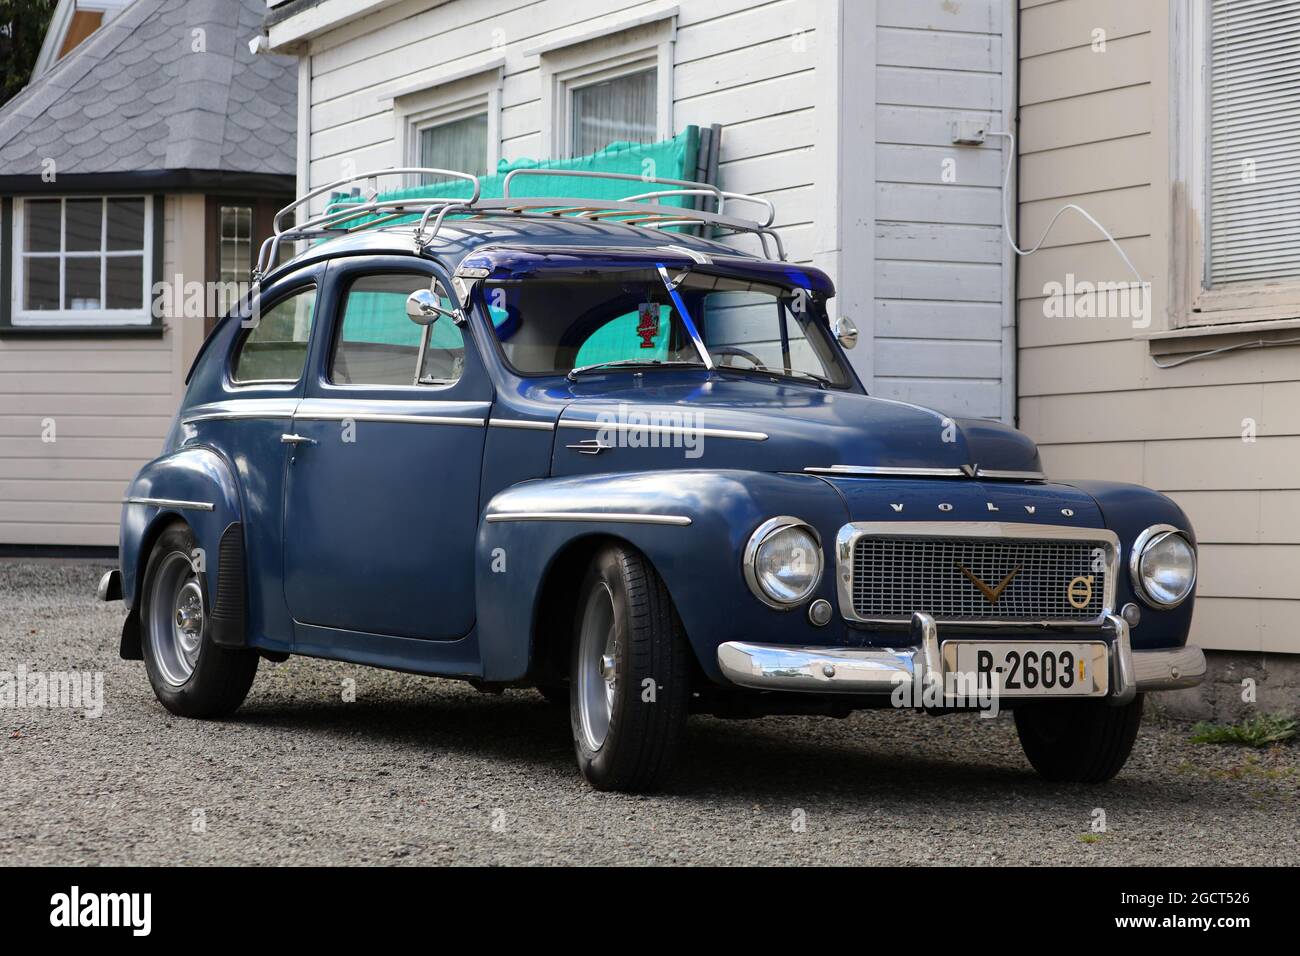 FLEKKEFJORD, NORWAY - JULY 19, 2020: Volvo Duett oldtimer car parked in Norway. There are 2.8 million cars registered in Norway (2019). Stock Photo